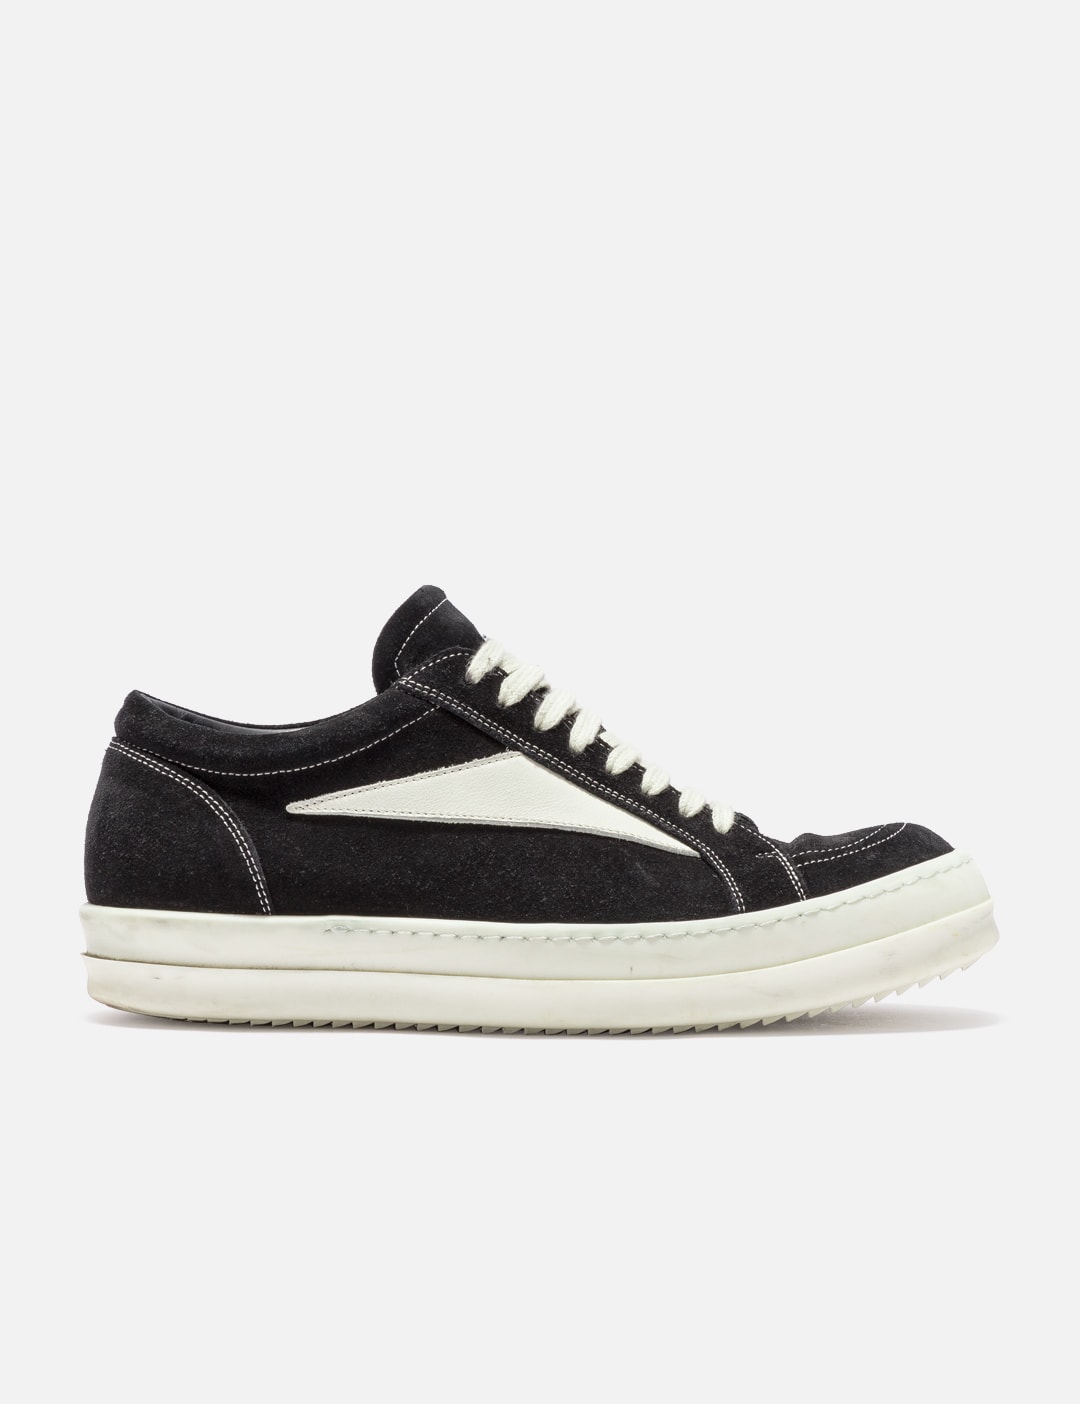 Rick Owens - Rick Owens Vintage Sneakers | HBX - Globally Curated ...